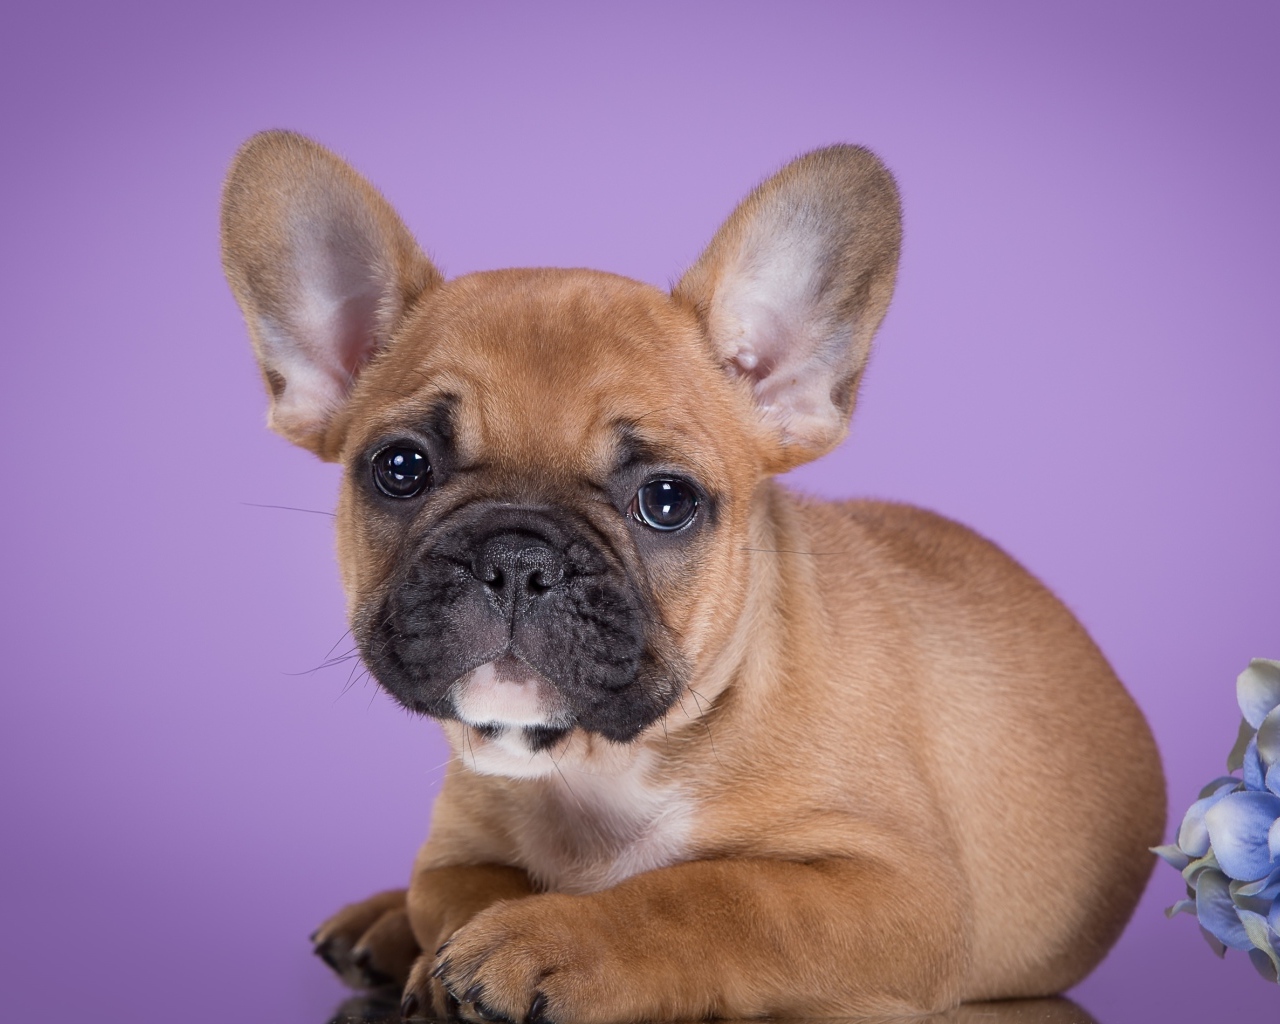 Little puppy french bulldog on lilac background